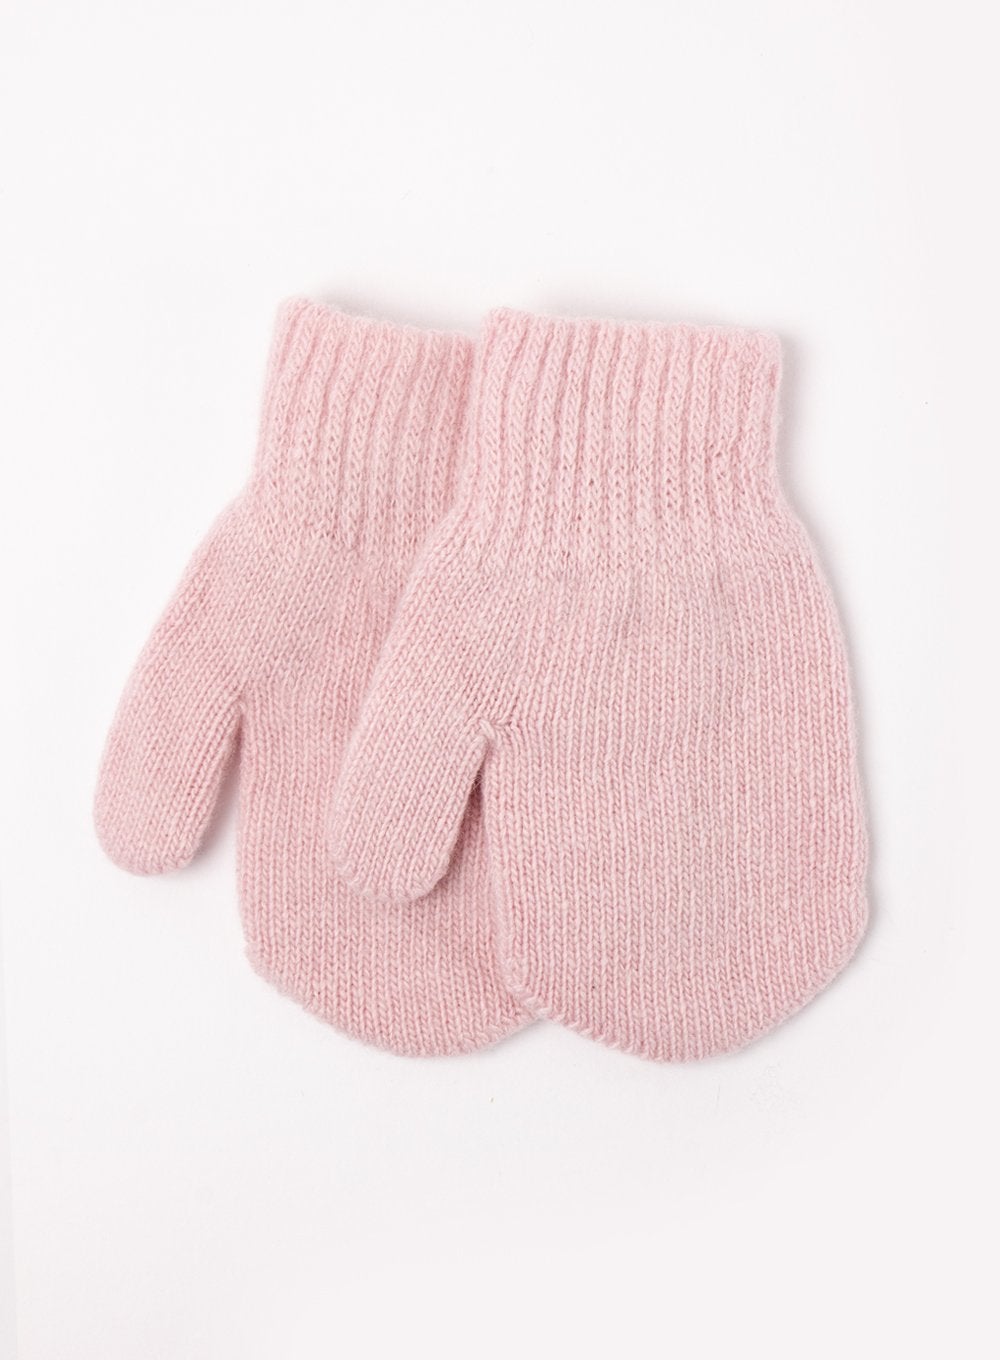 Mittens in Pink L - Trotters London